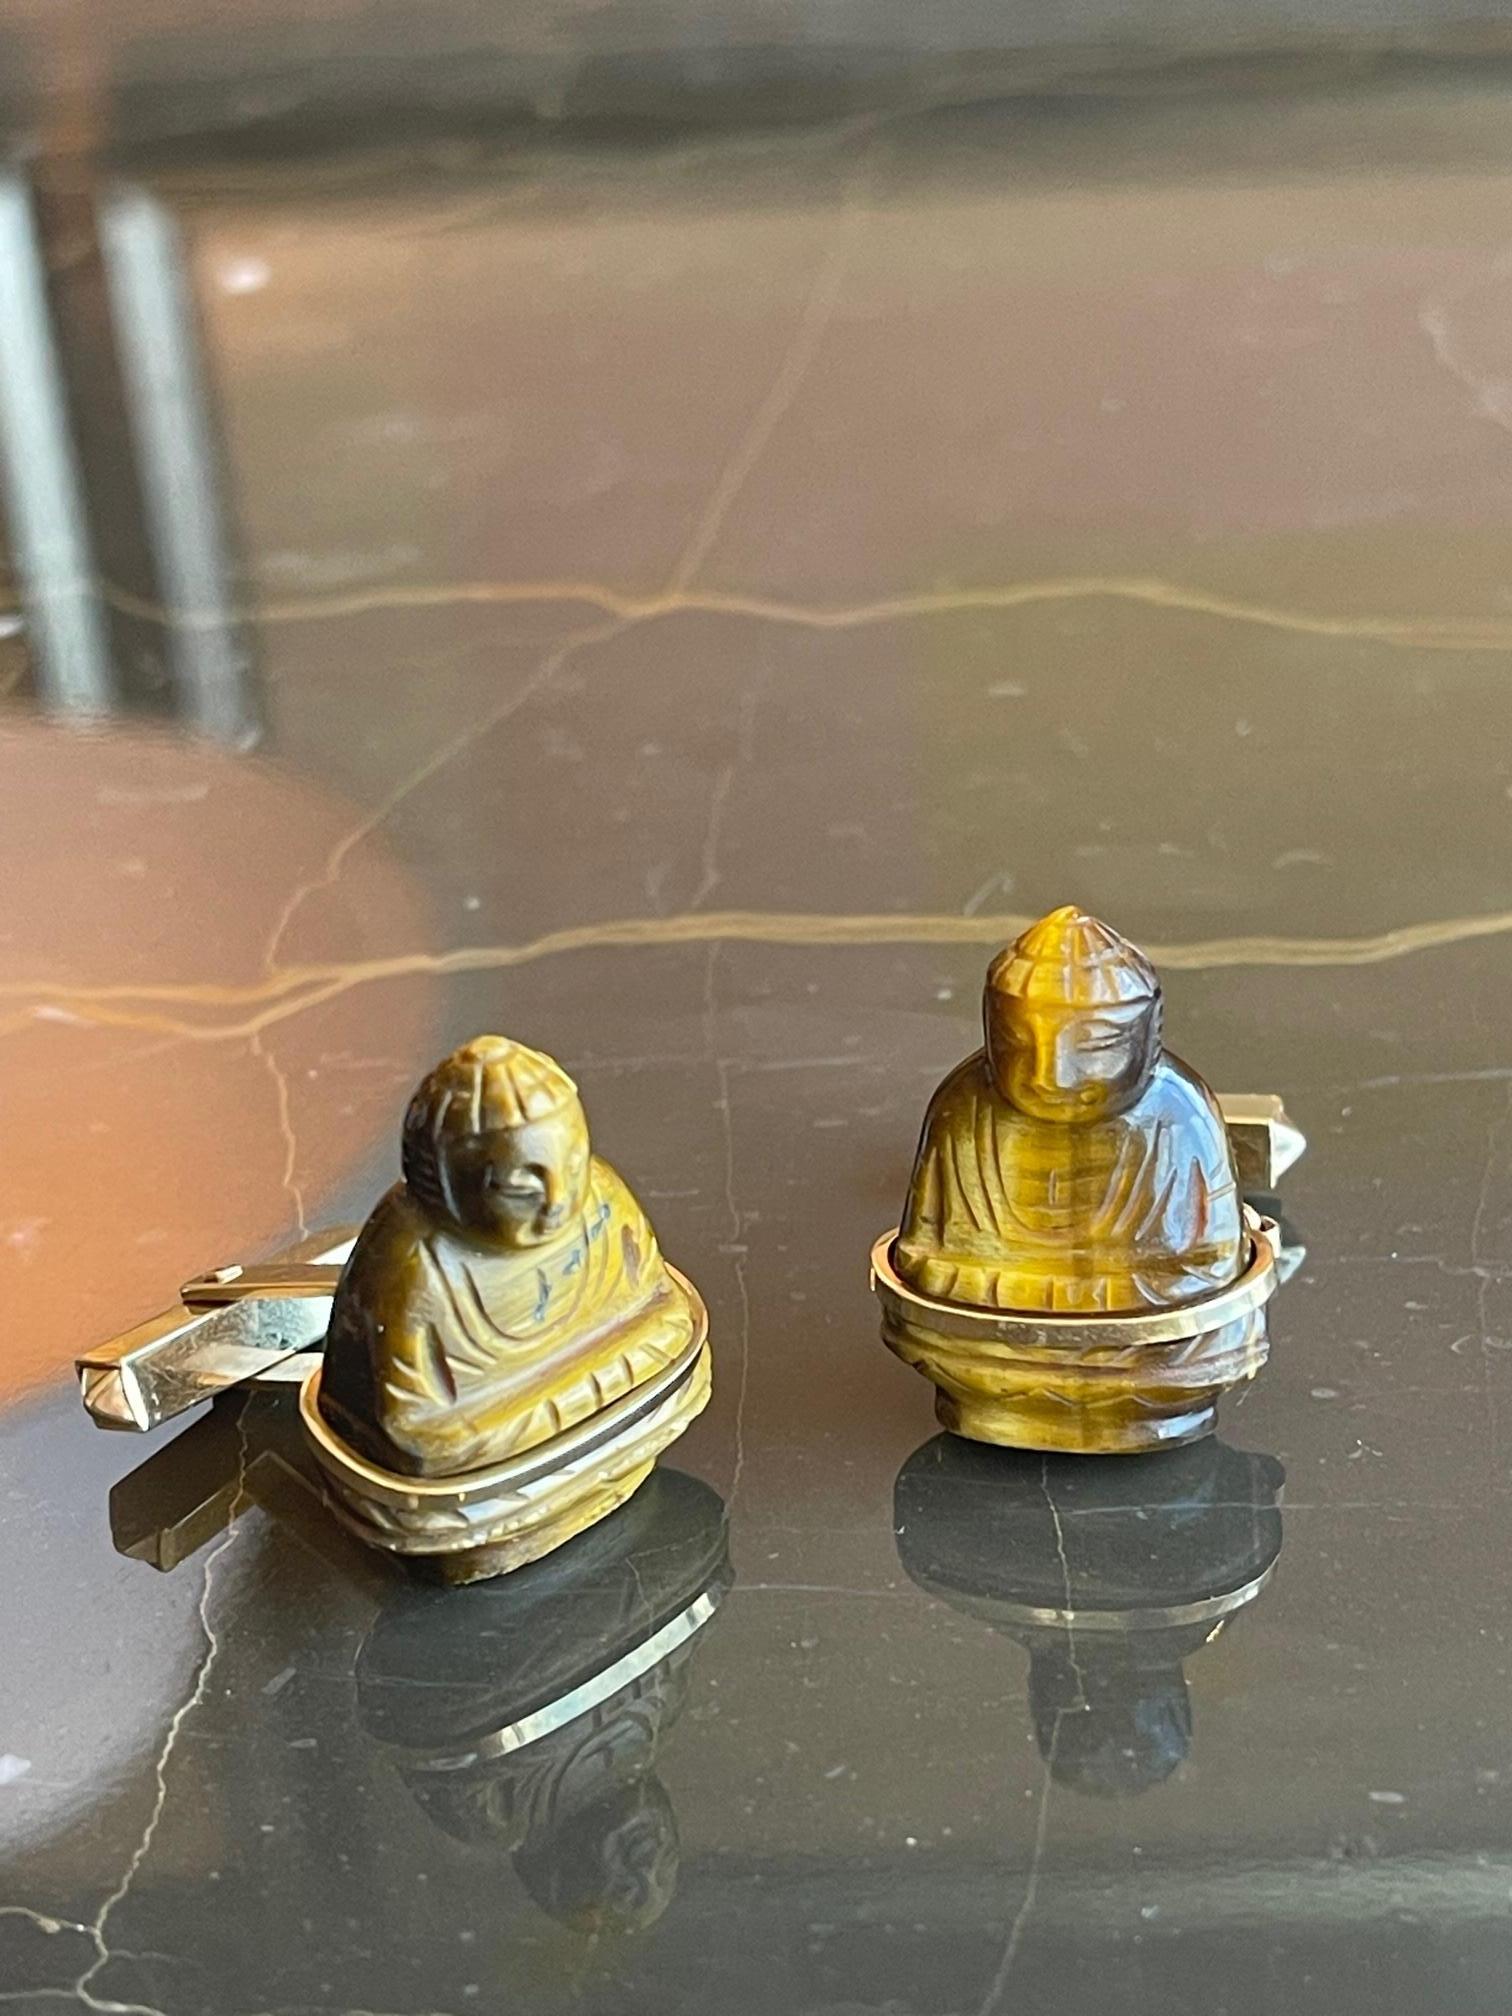 Fabulous and substantial 14k Yellow Gold and Carved Tiger's Eye Vintage Buddha Cufflinks. The luxurious hue of the carved tiger's eye is elegant and classic. The buddhas are meticulously carved and a perfect pair. The gold wrapping the cufflinks is